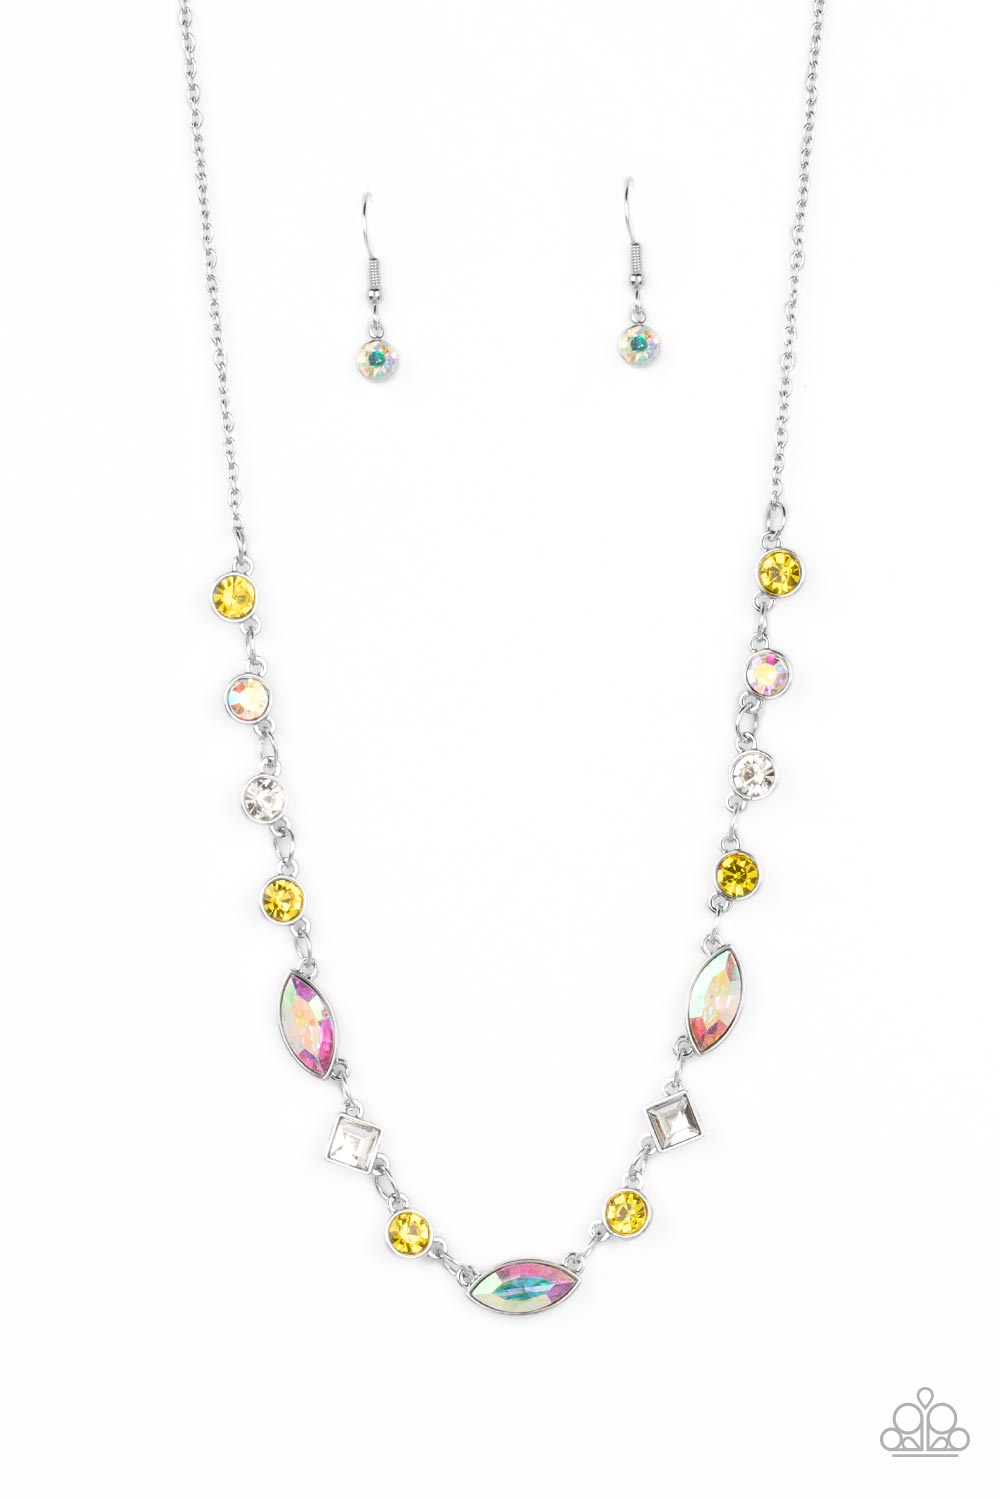 Paparazzi Necklace Irresistible HEIR-idescence - Yellow